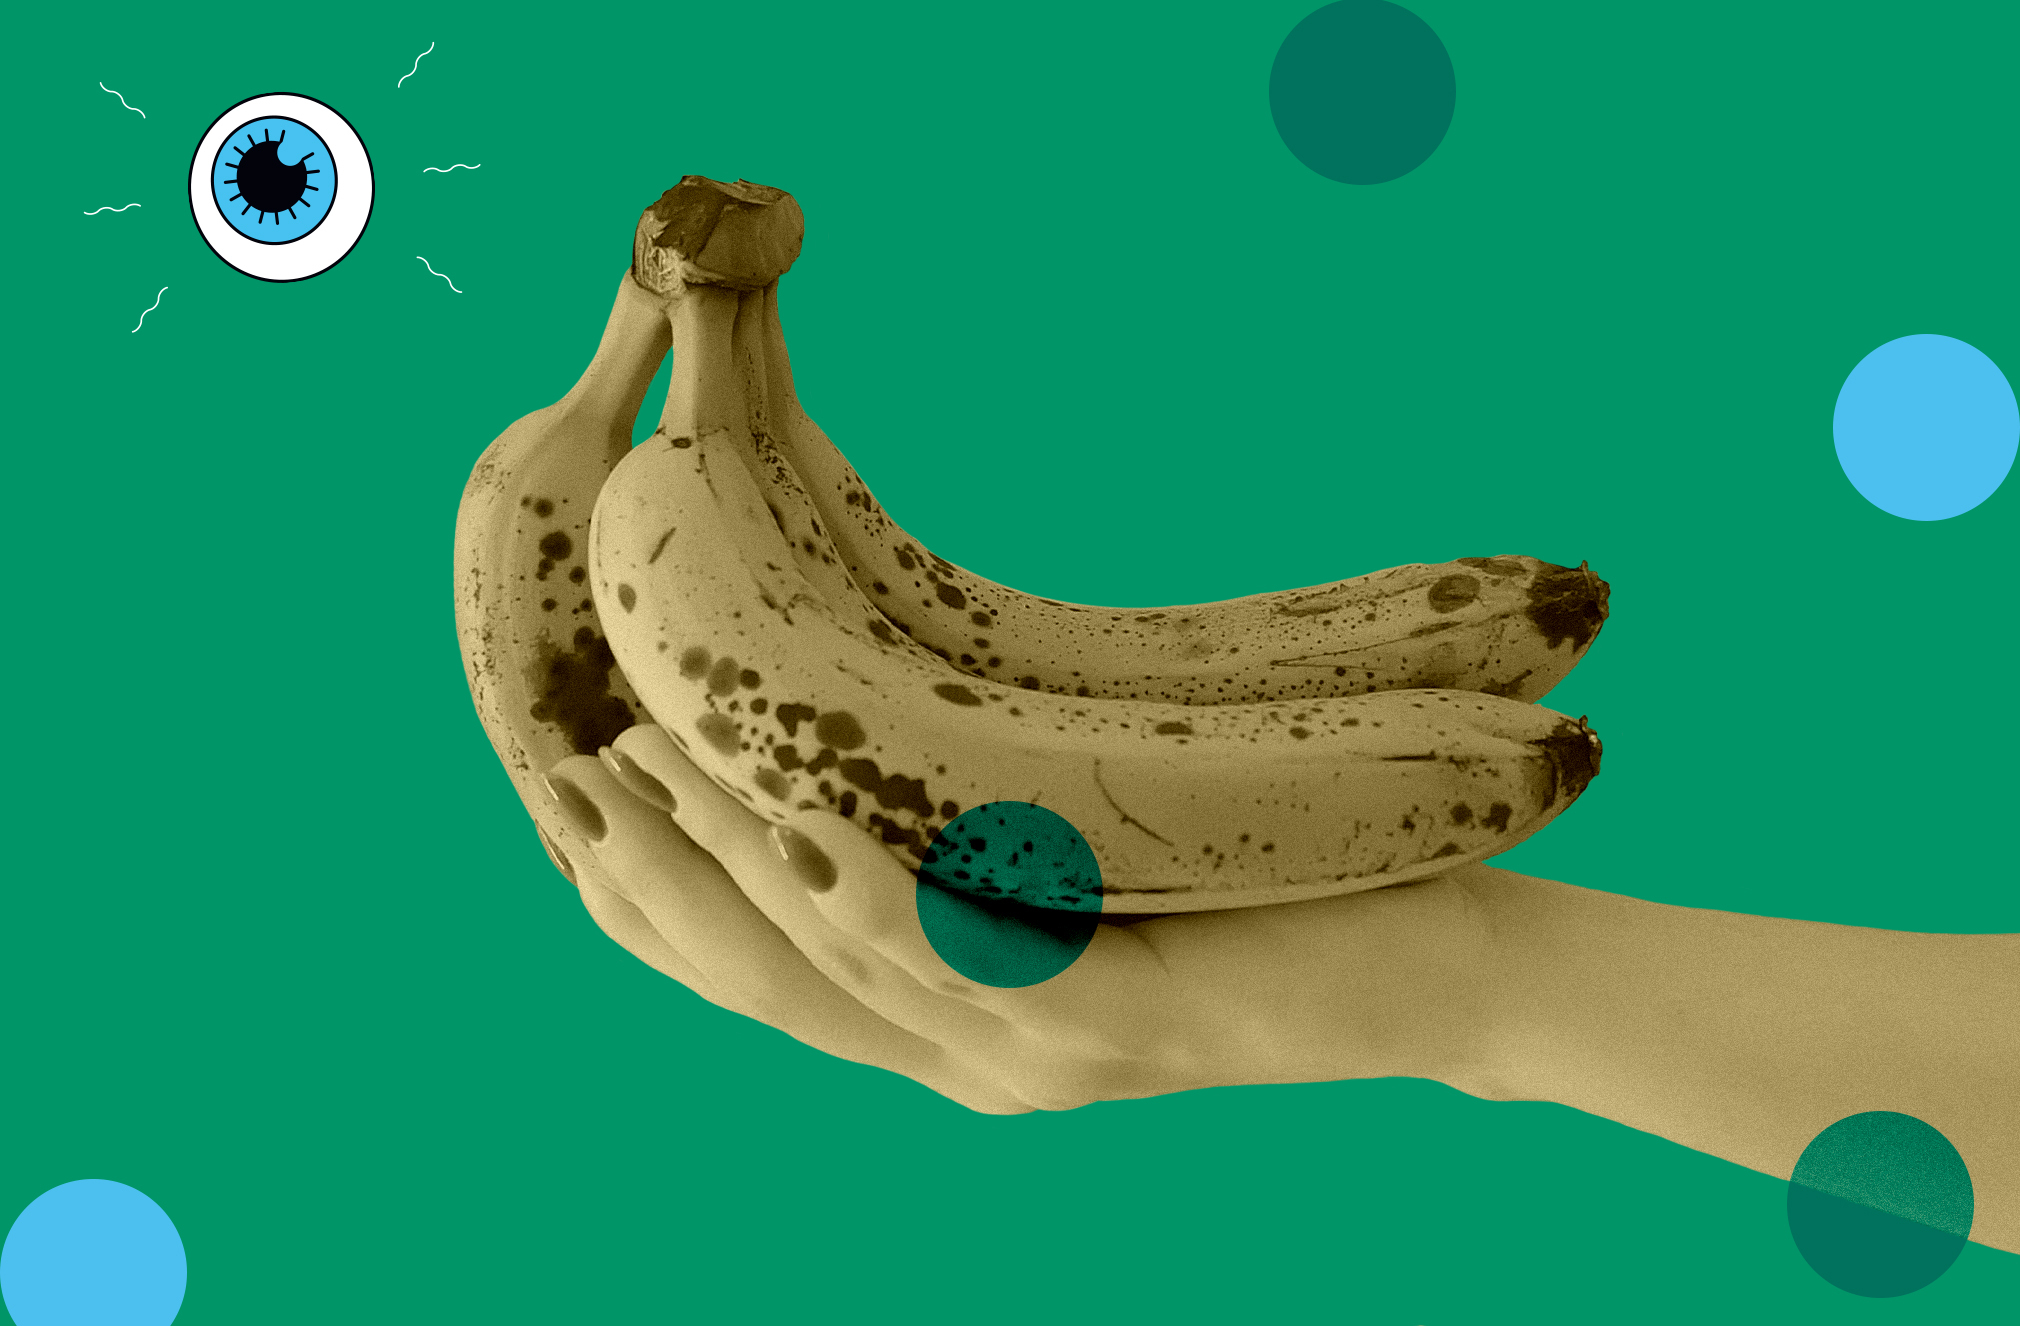 someone holds a bunch of bananas on a green background with blue and green polka dots and a small eyeball logo in the upper left corner